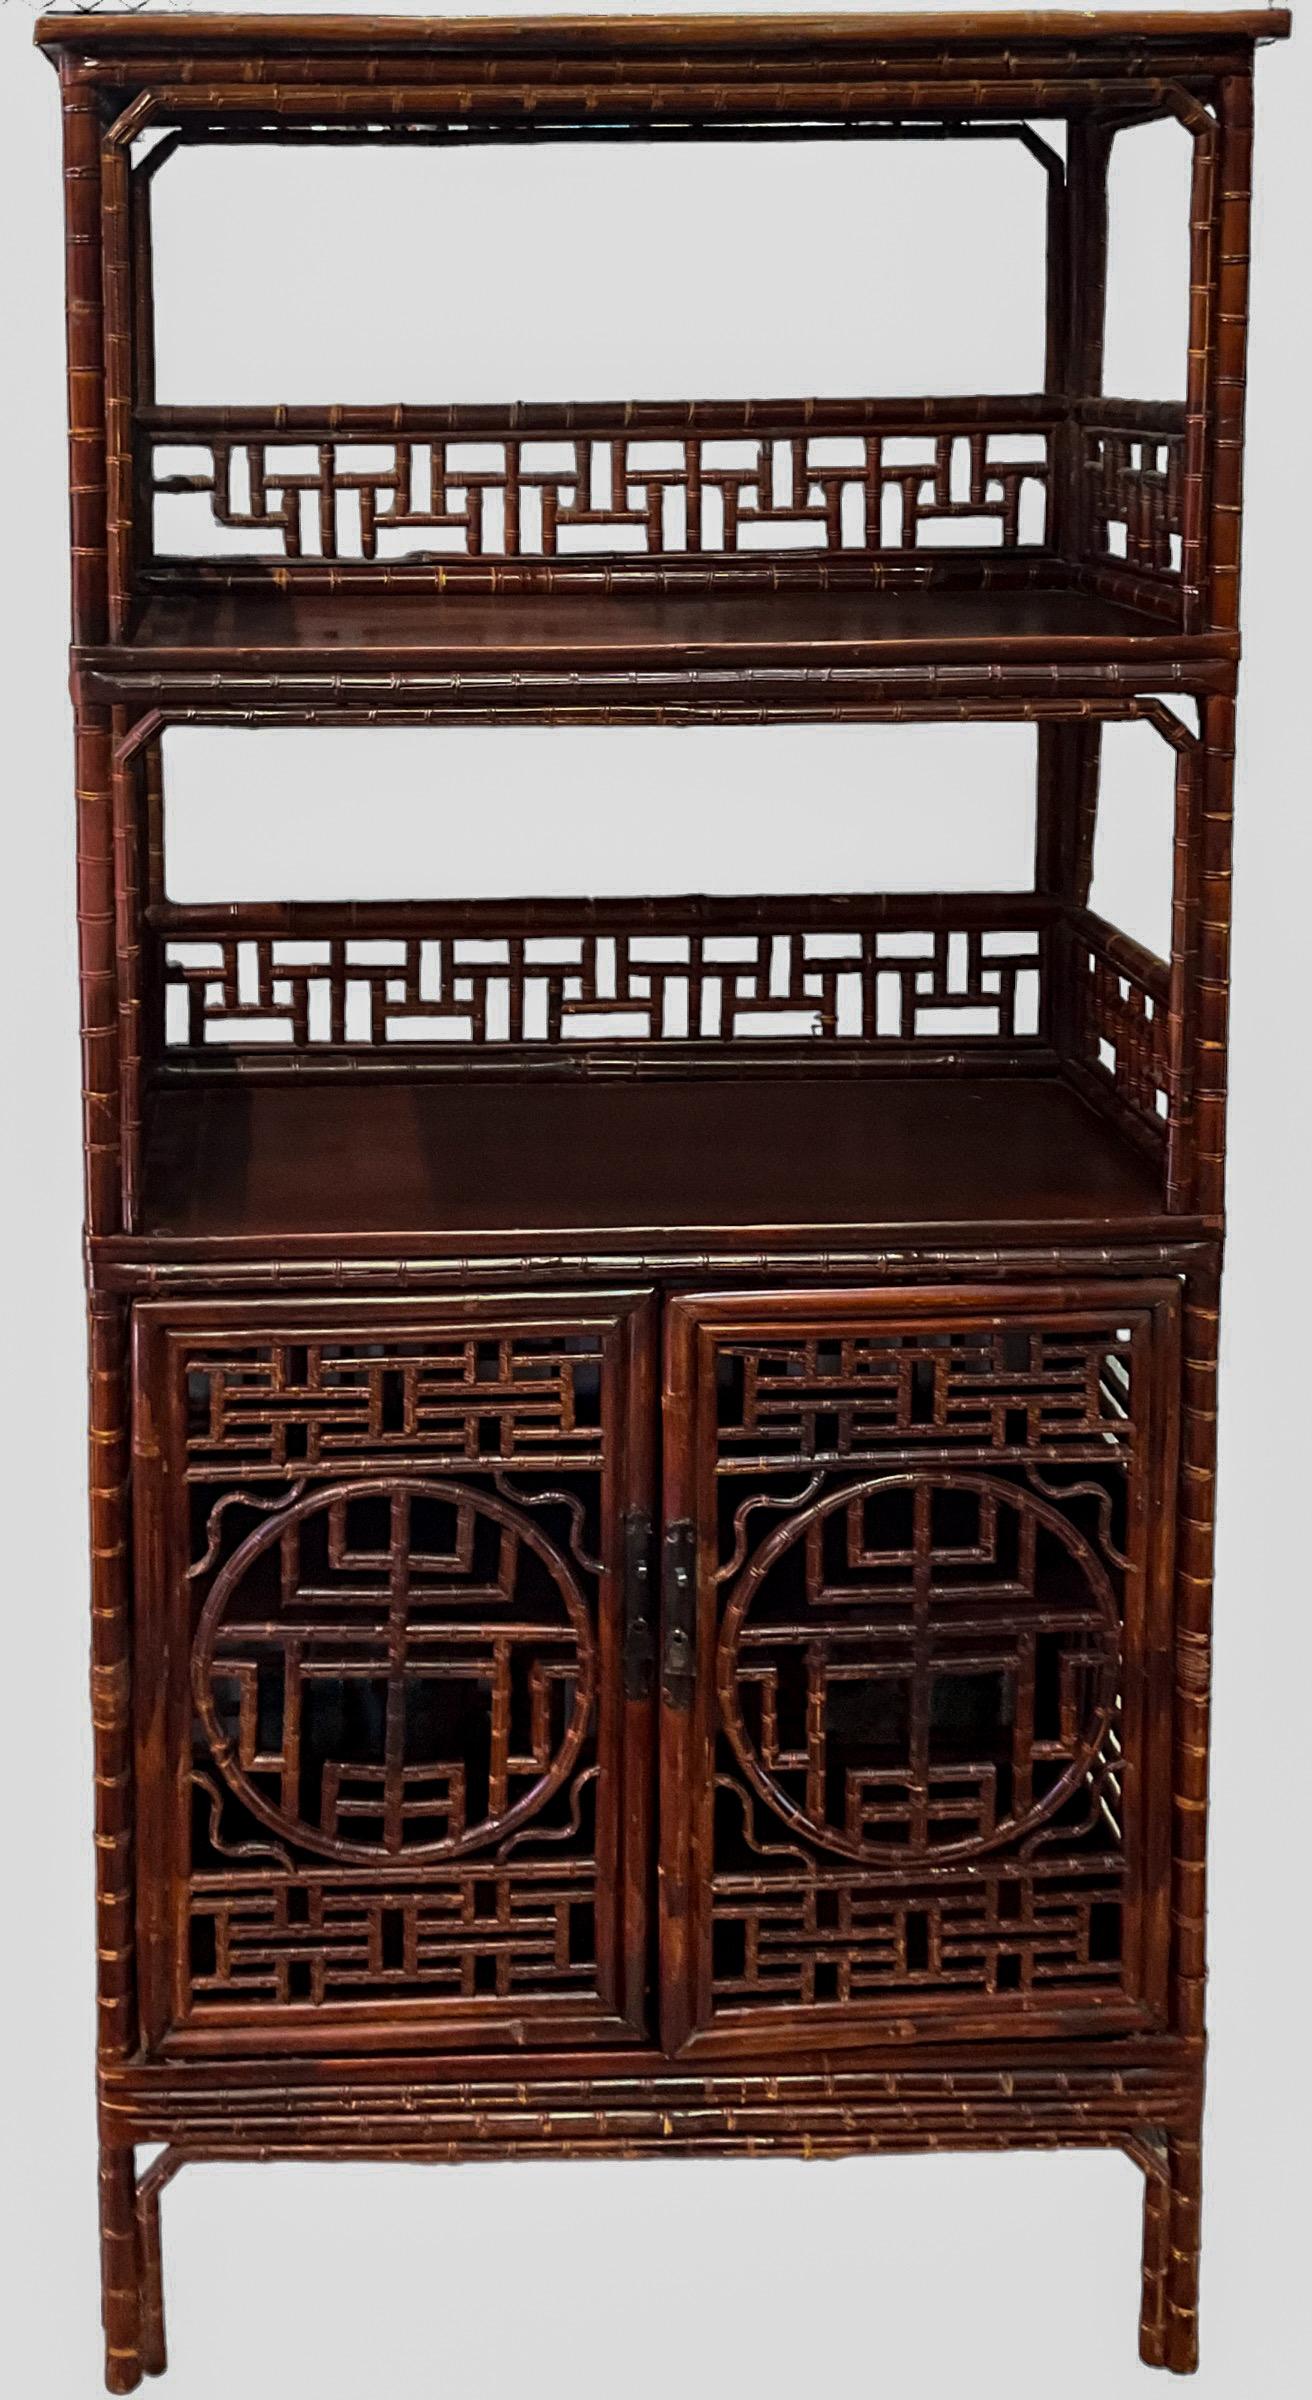 Early 20th-C. Chinese Bamboo Cabinet / Etagere / Bookcase With Ornate Fretwork  2